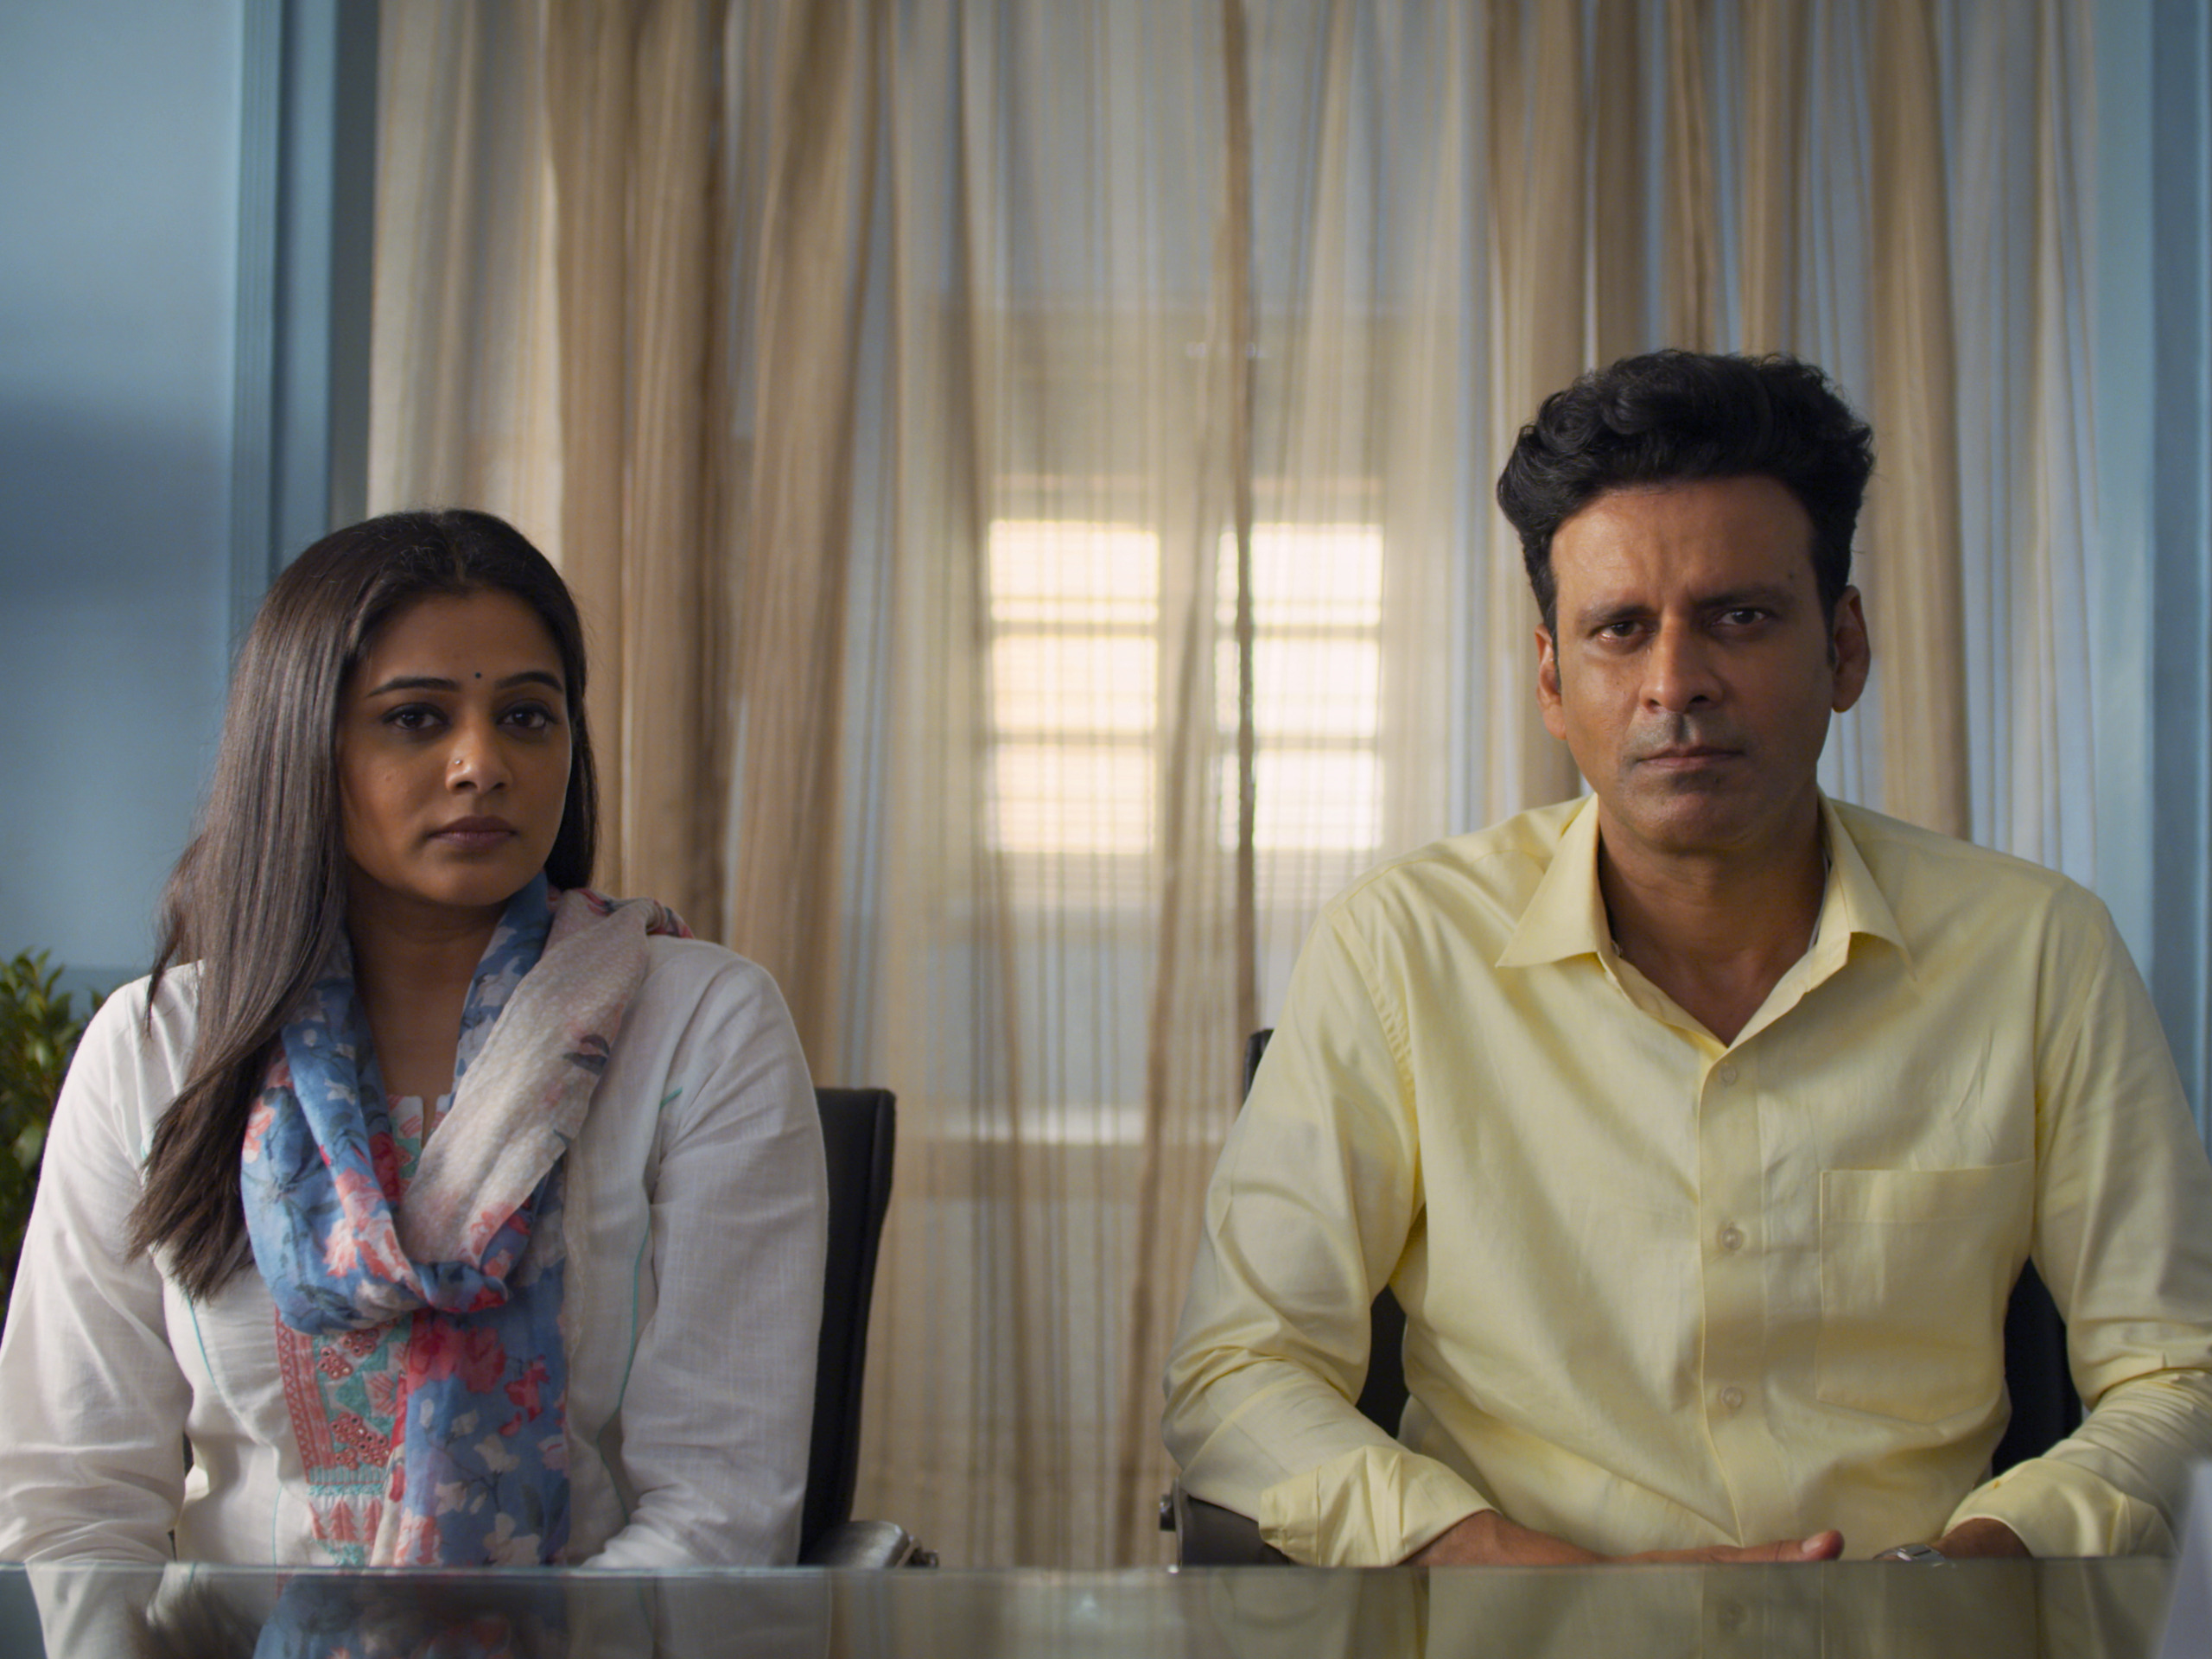 Sacred Games to The Family Man: IMDb's 50 most popular Indian web series